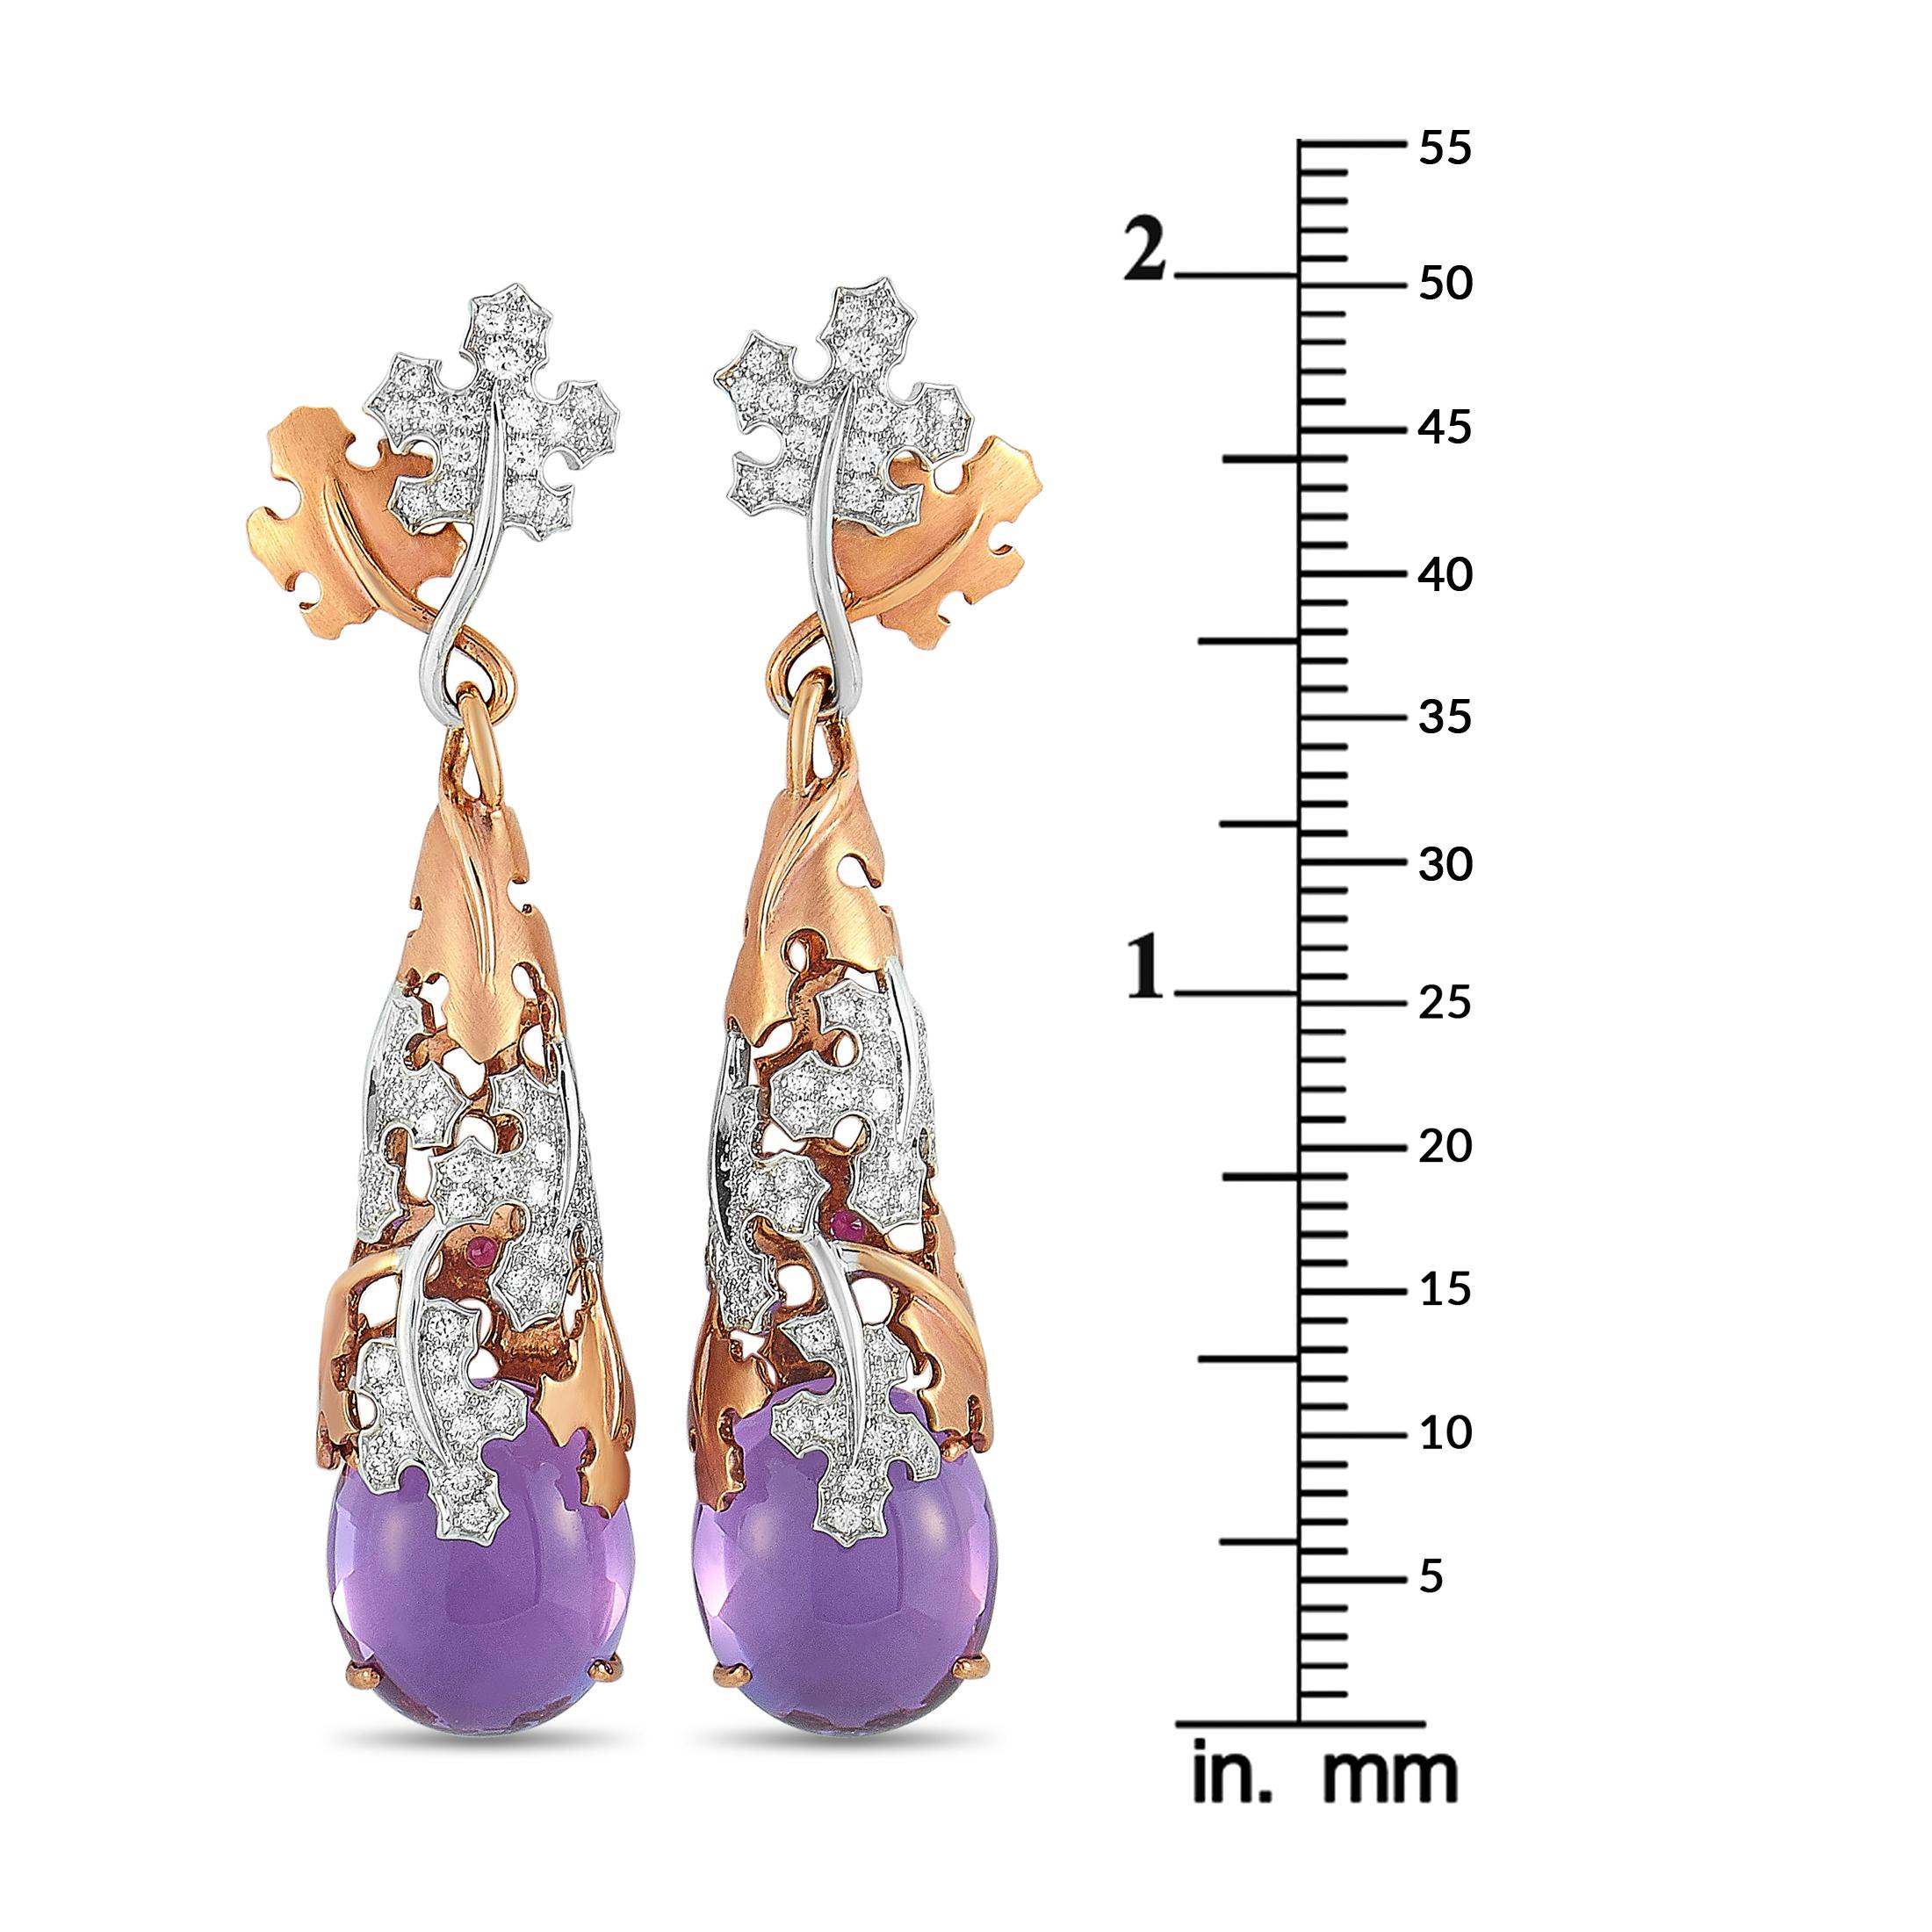 The Roberto Coin “Garden” earrings are made out of 18K rose and white gold and each weighs 7.5 grams, measuring 2” in length and 0.37” in width. The earrings are set with diamonds and amethysts that total 0.73 and 12.00 carats respectively.

Offered